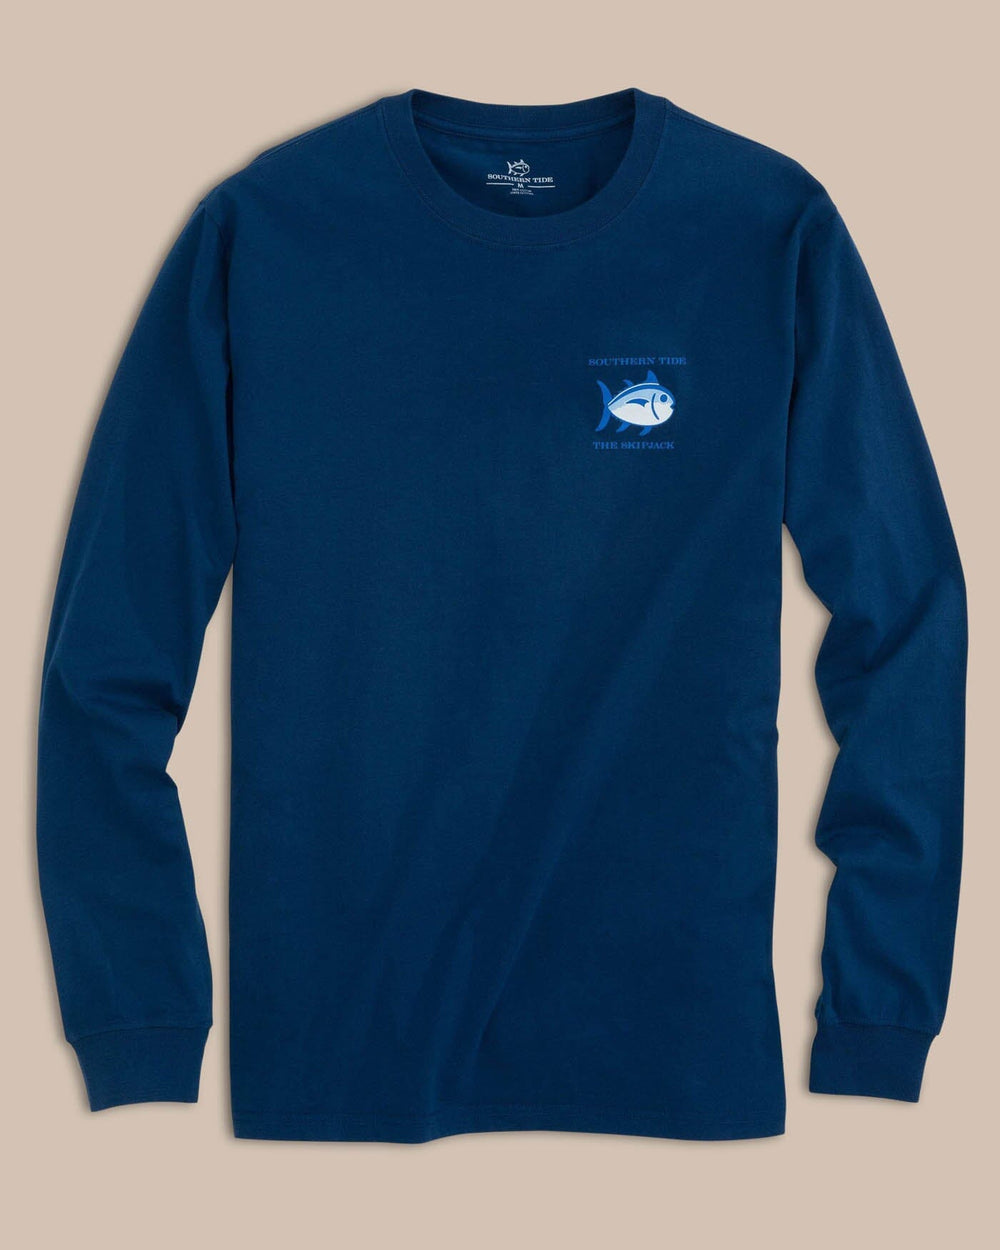 The front view of the Men's Navy Long Sleeve Original Skipjack T-shirt by Southern Tide - Yacht Blue